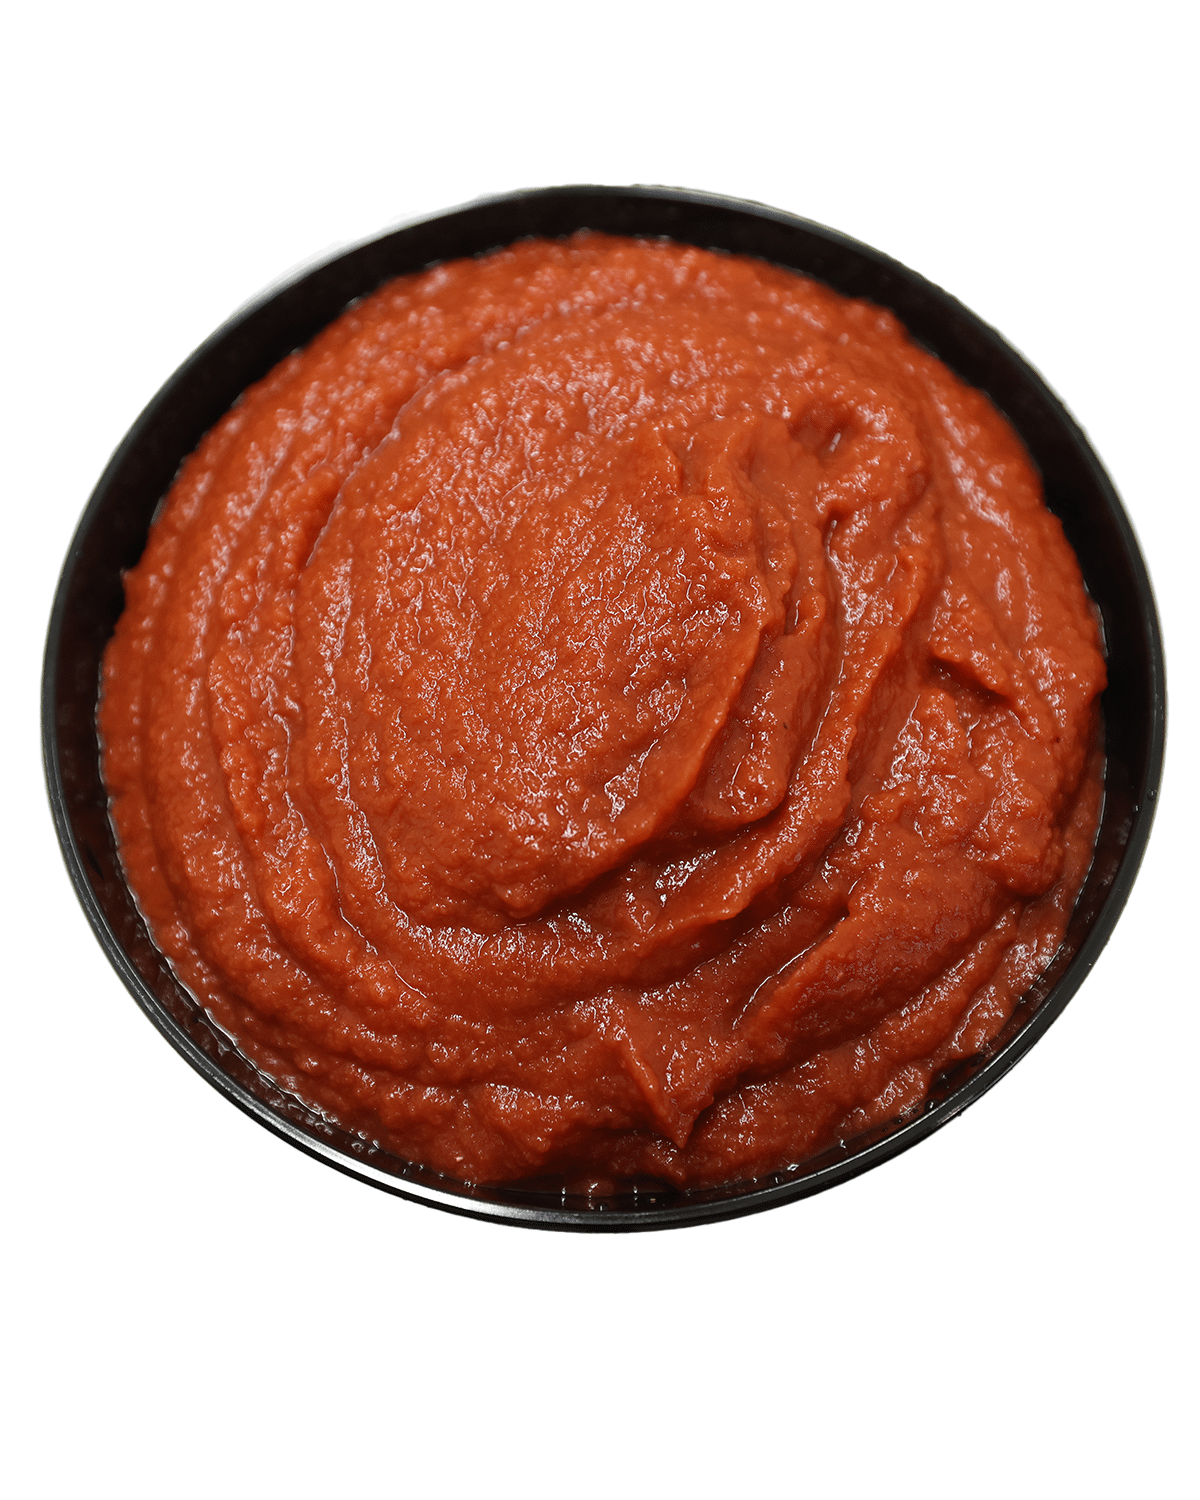 A red sauce on a white background, made with organic EVOO and spices.